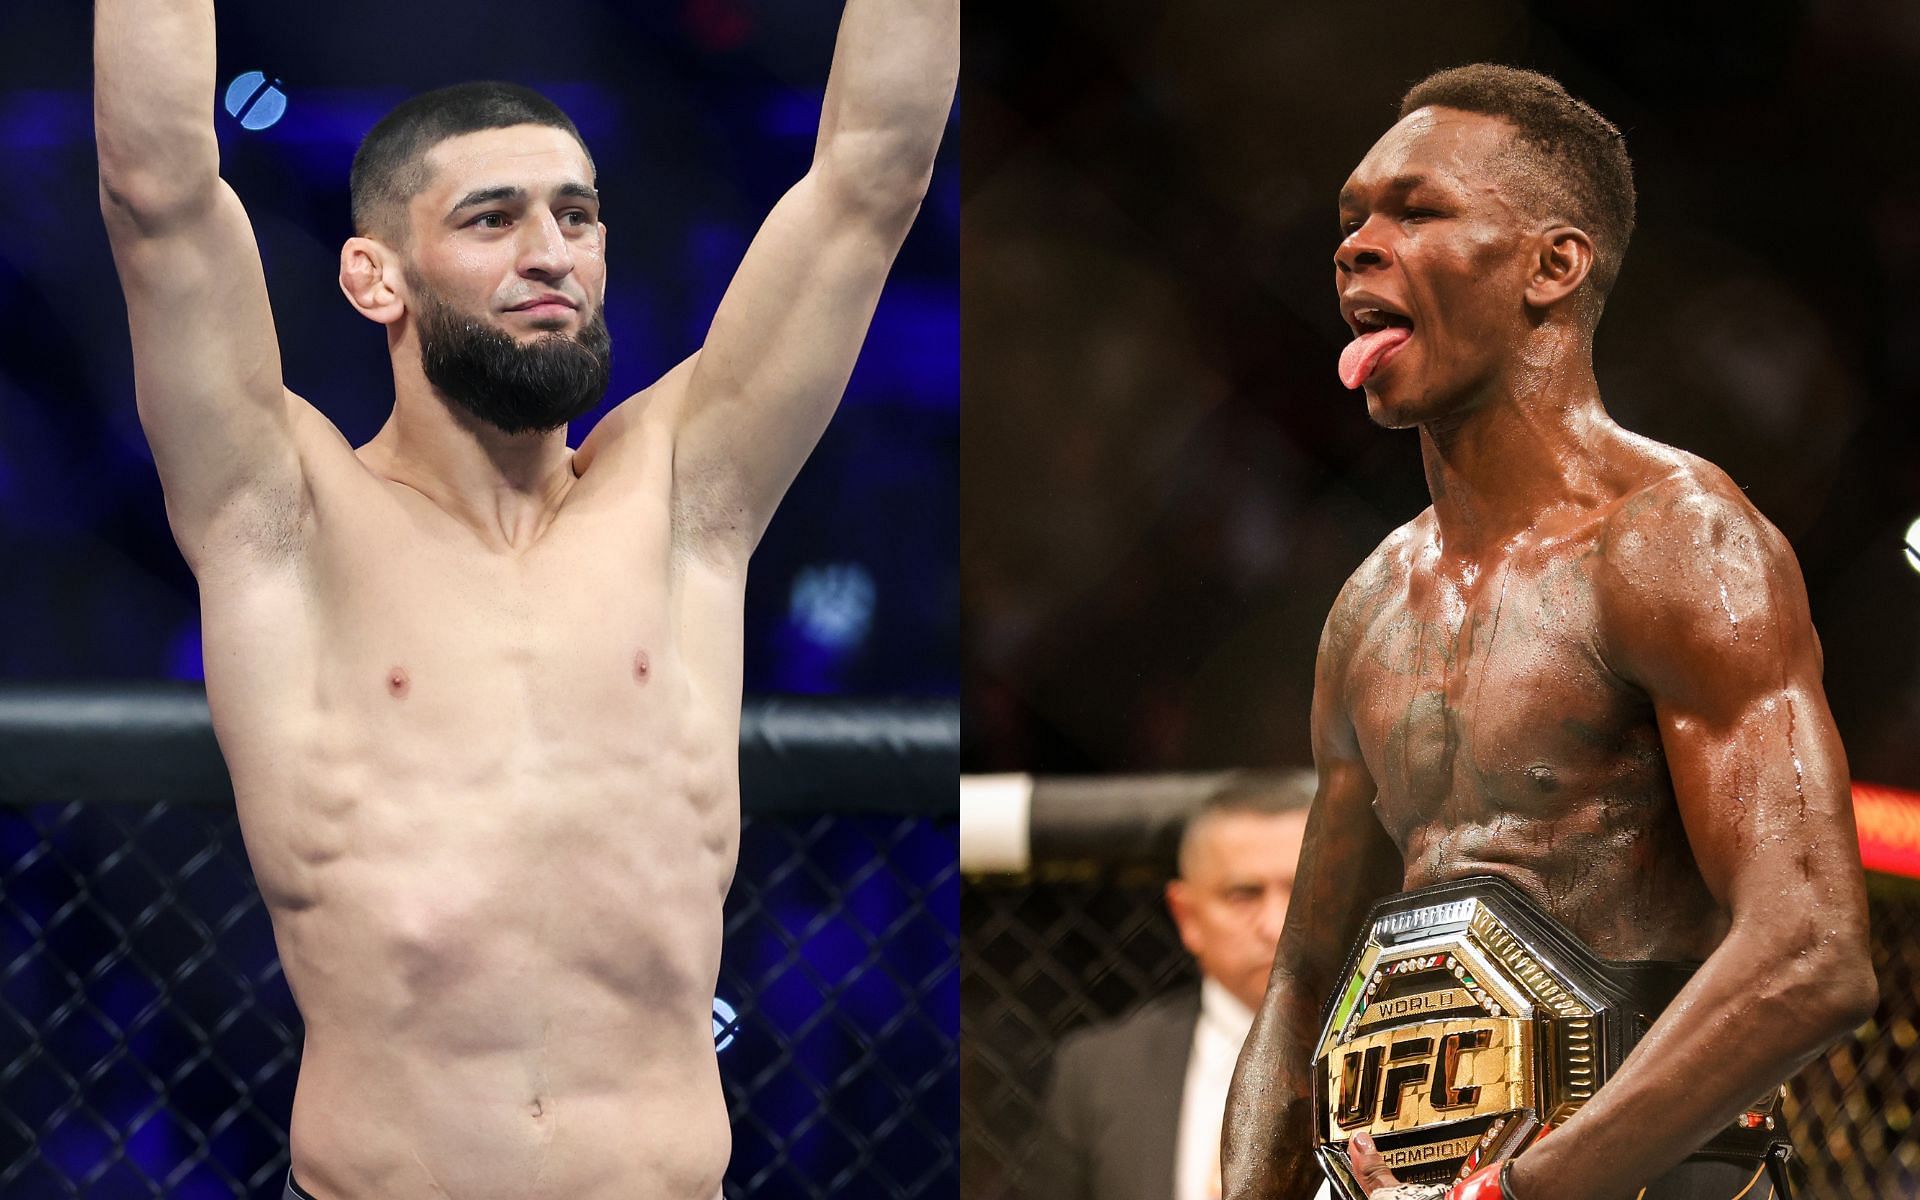 Khamzat Chimaev (left) and Israel Adesanya (right). [Images courtesy: both images from Getty Images]